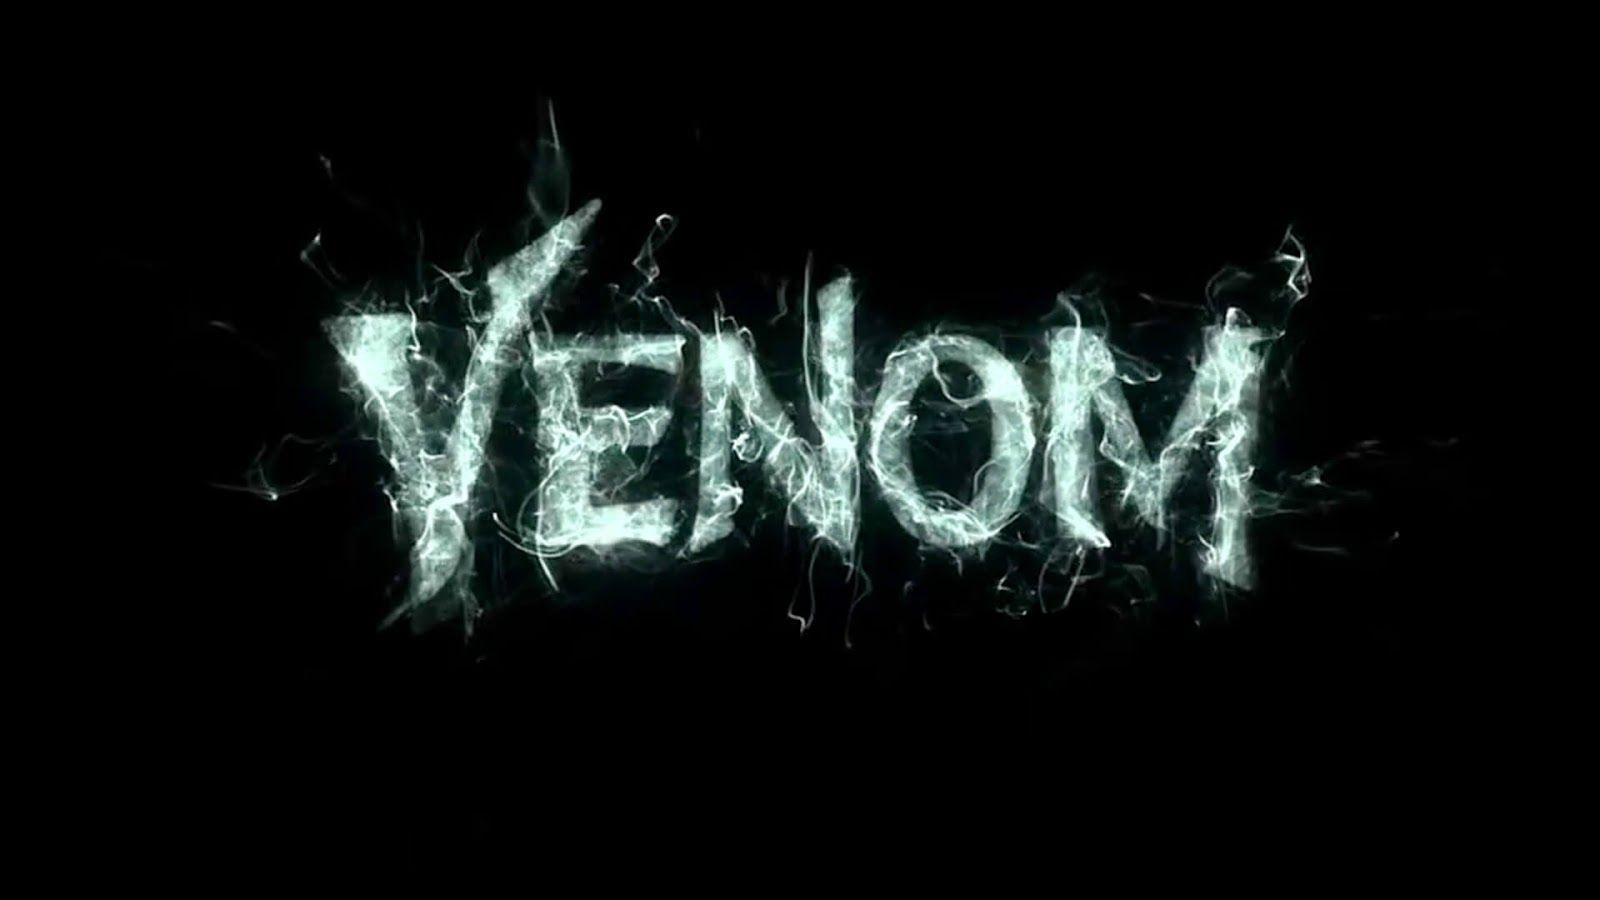 Venom marvel studio's movie you can download HD image, HD picture